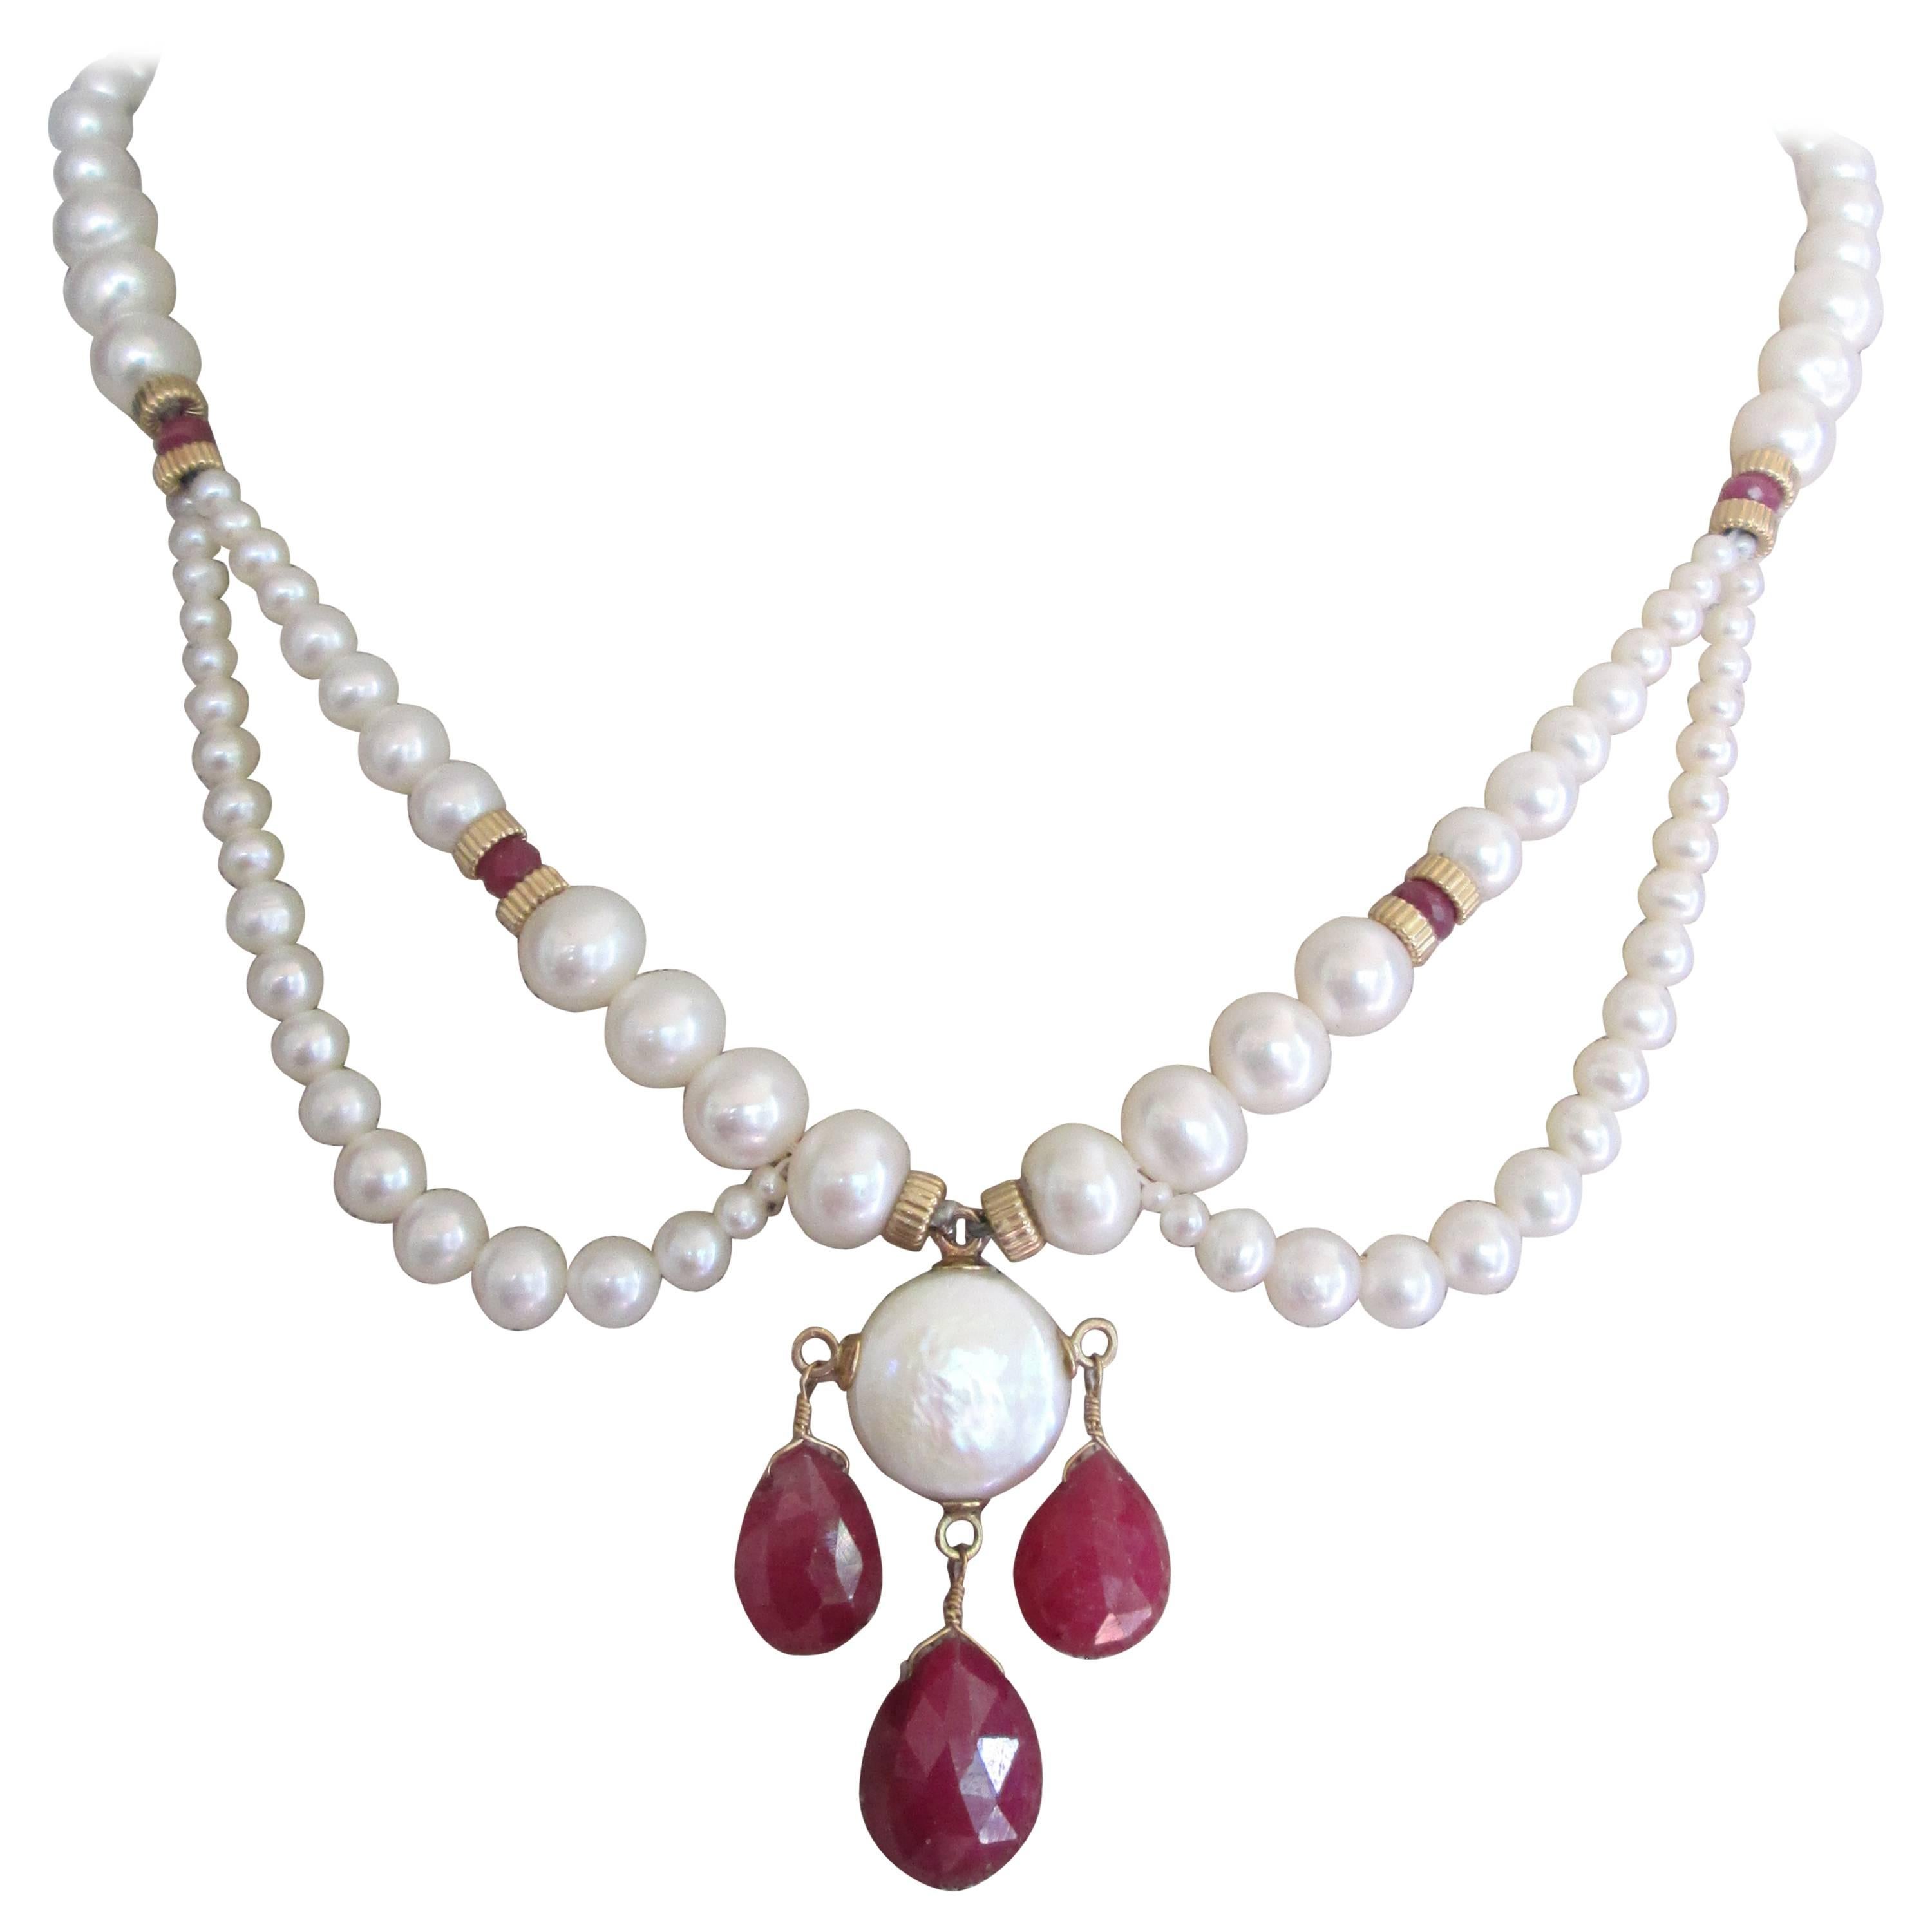 Graduated Pearl Draped Necklace with Ruby Briolettes , 14k gold clasp and beads